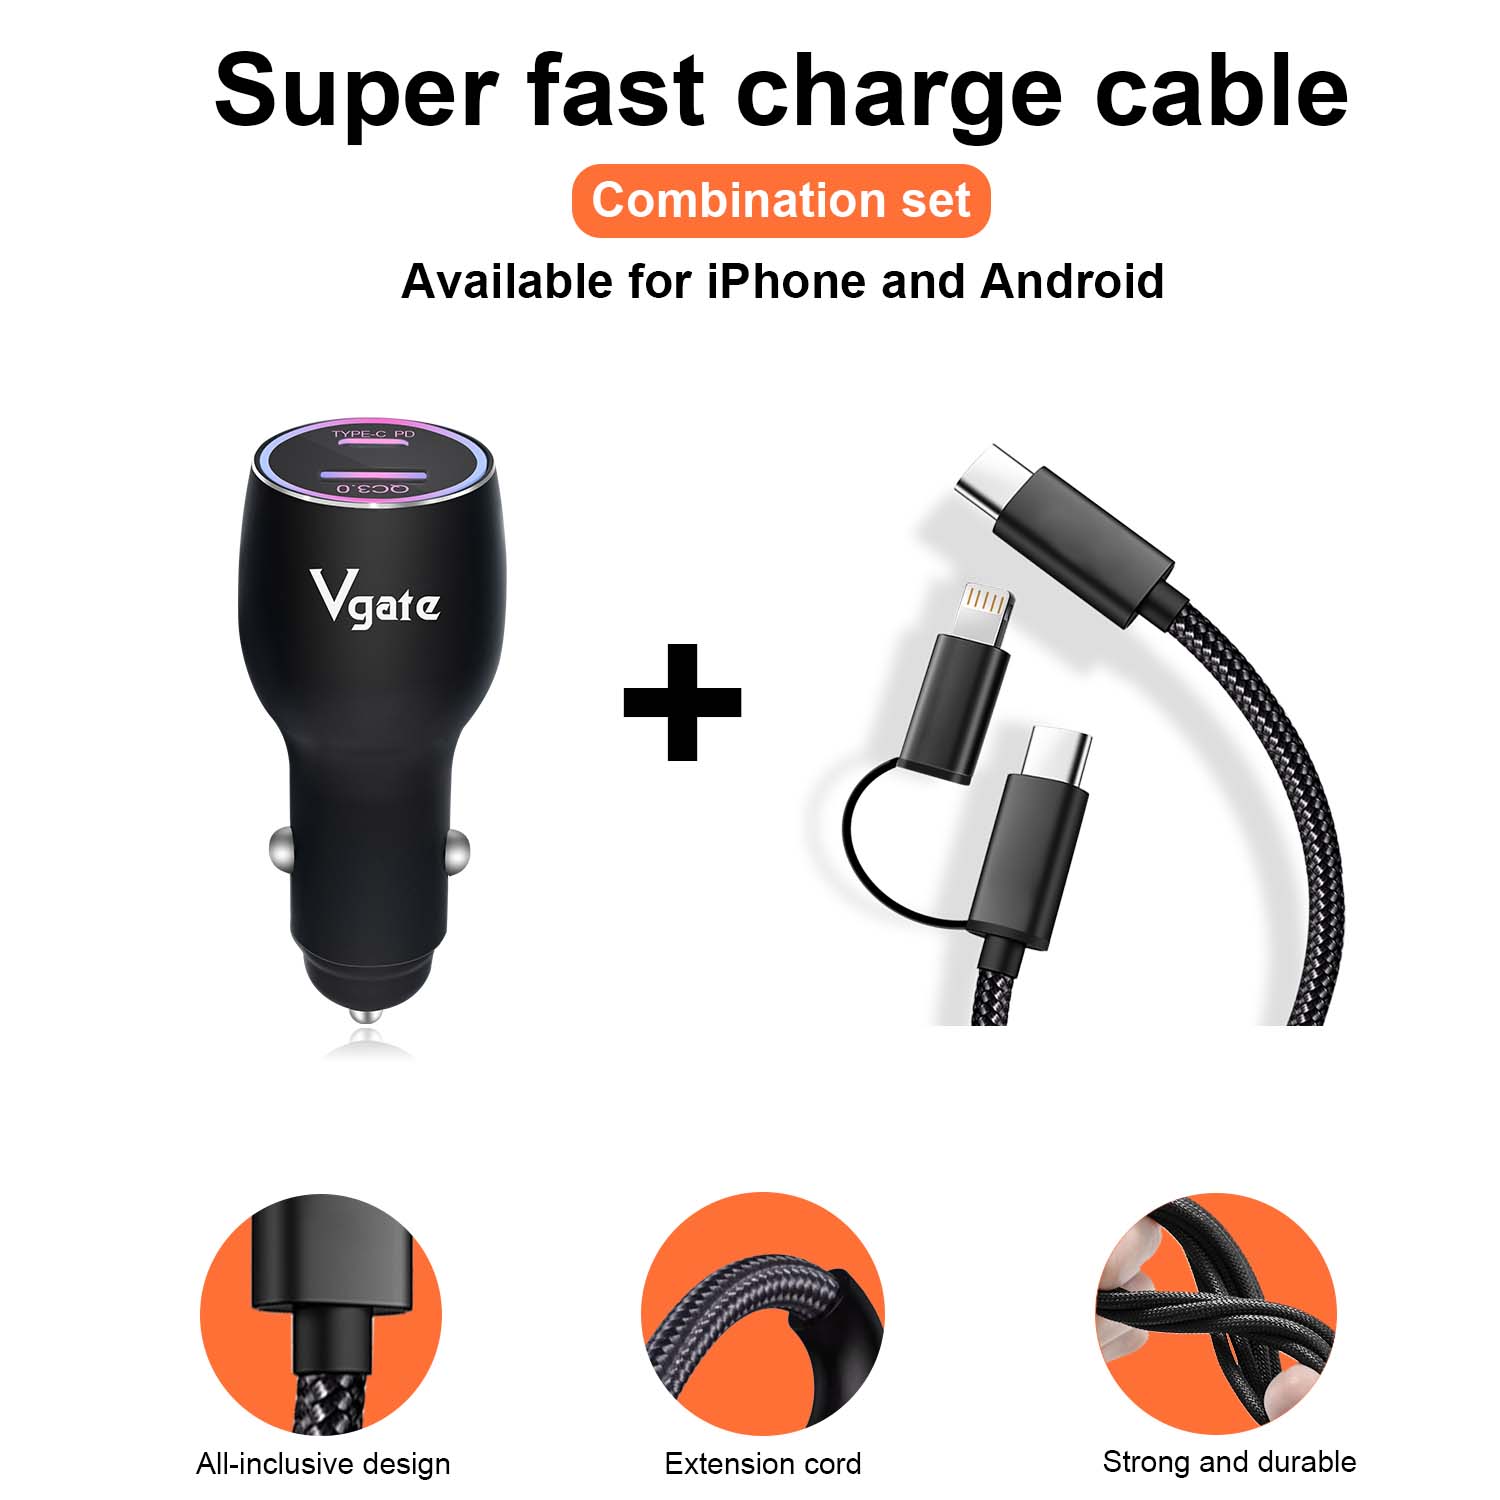 Smart Fast Charger 83W(VC 01)